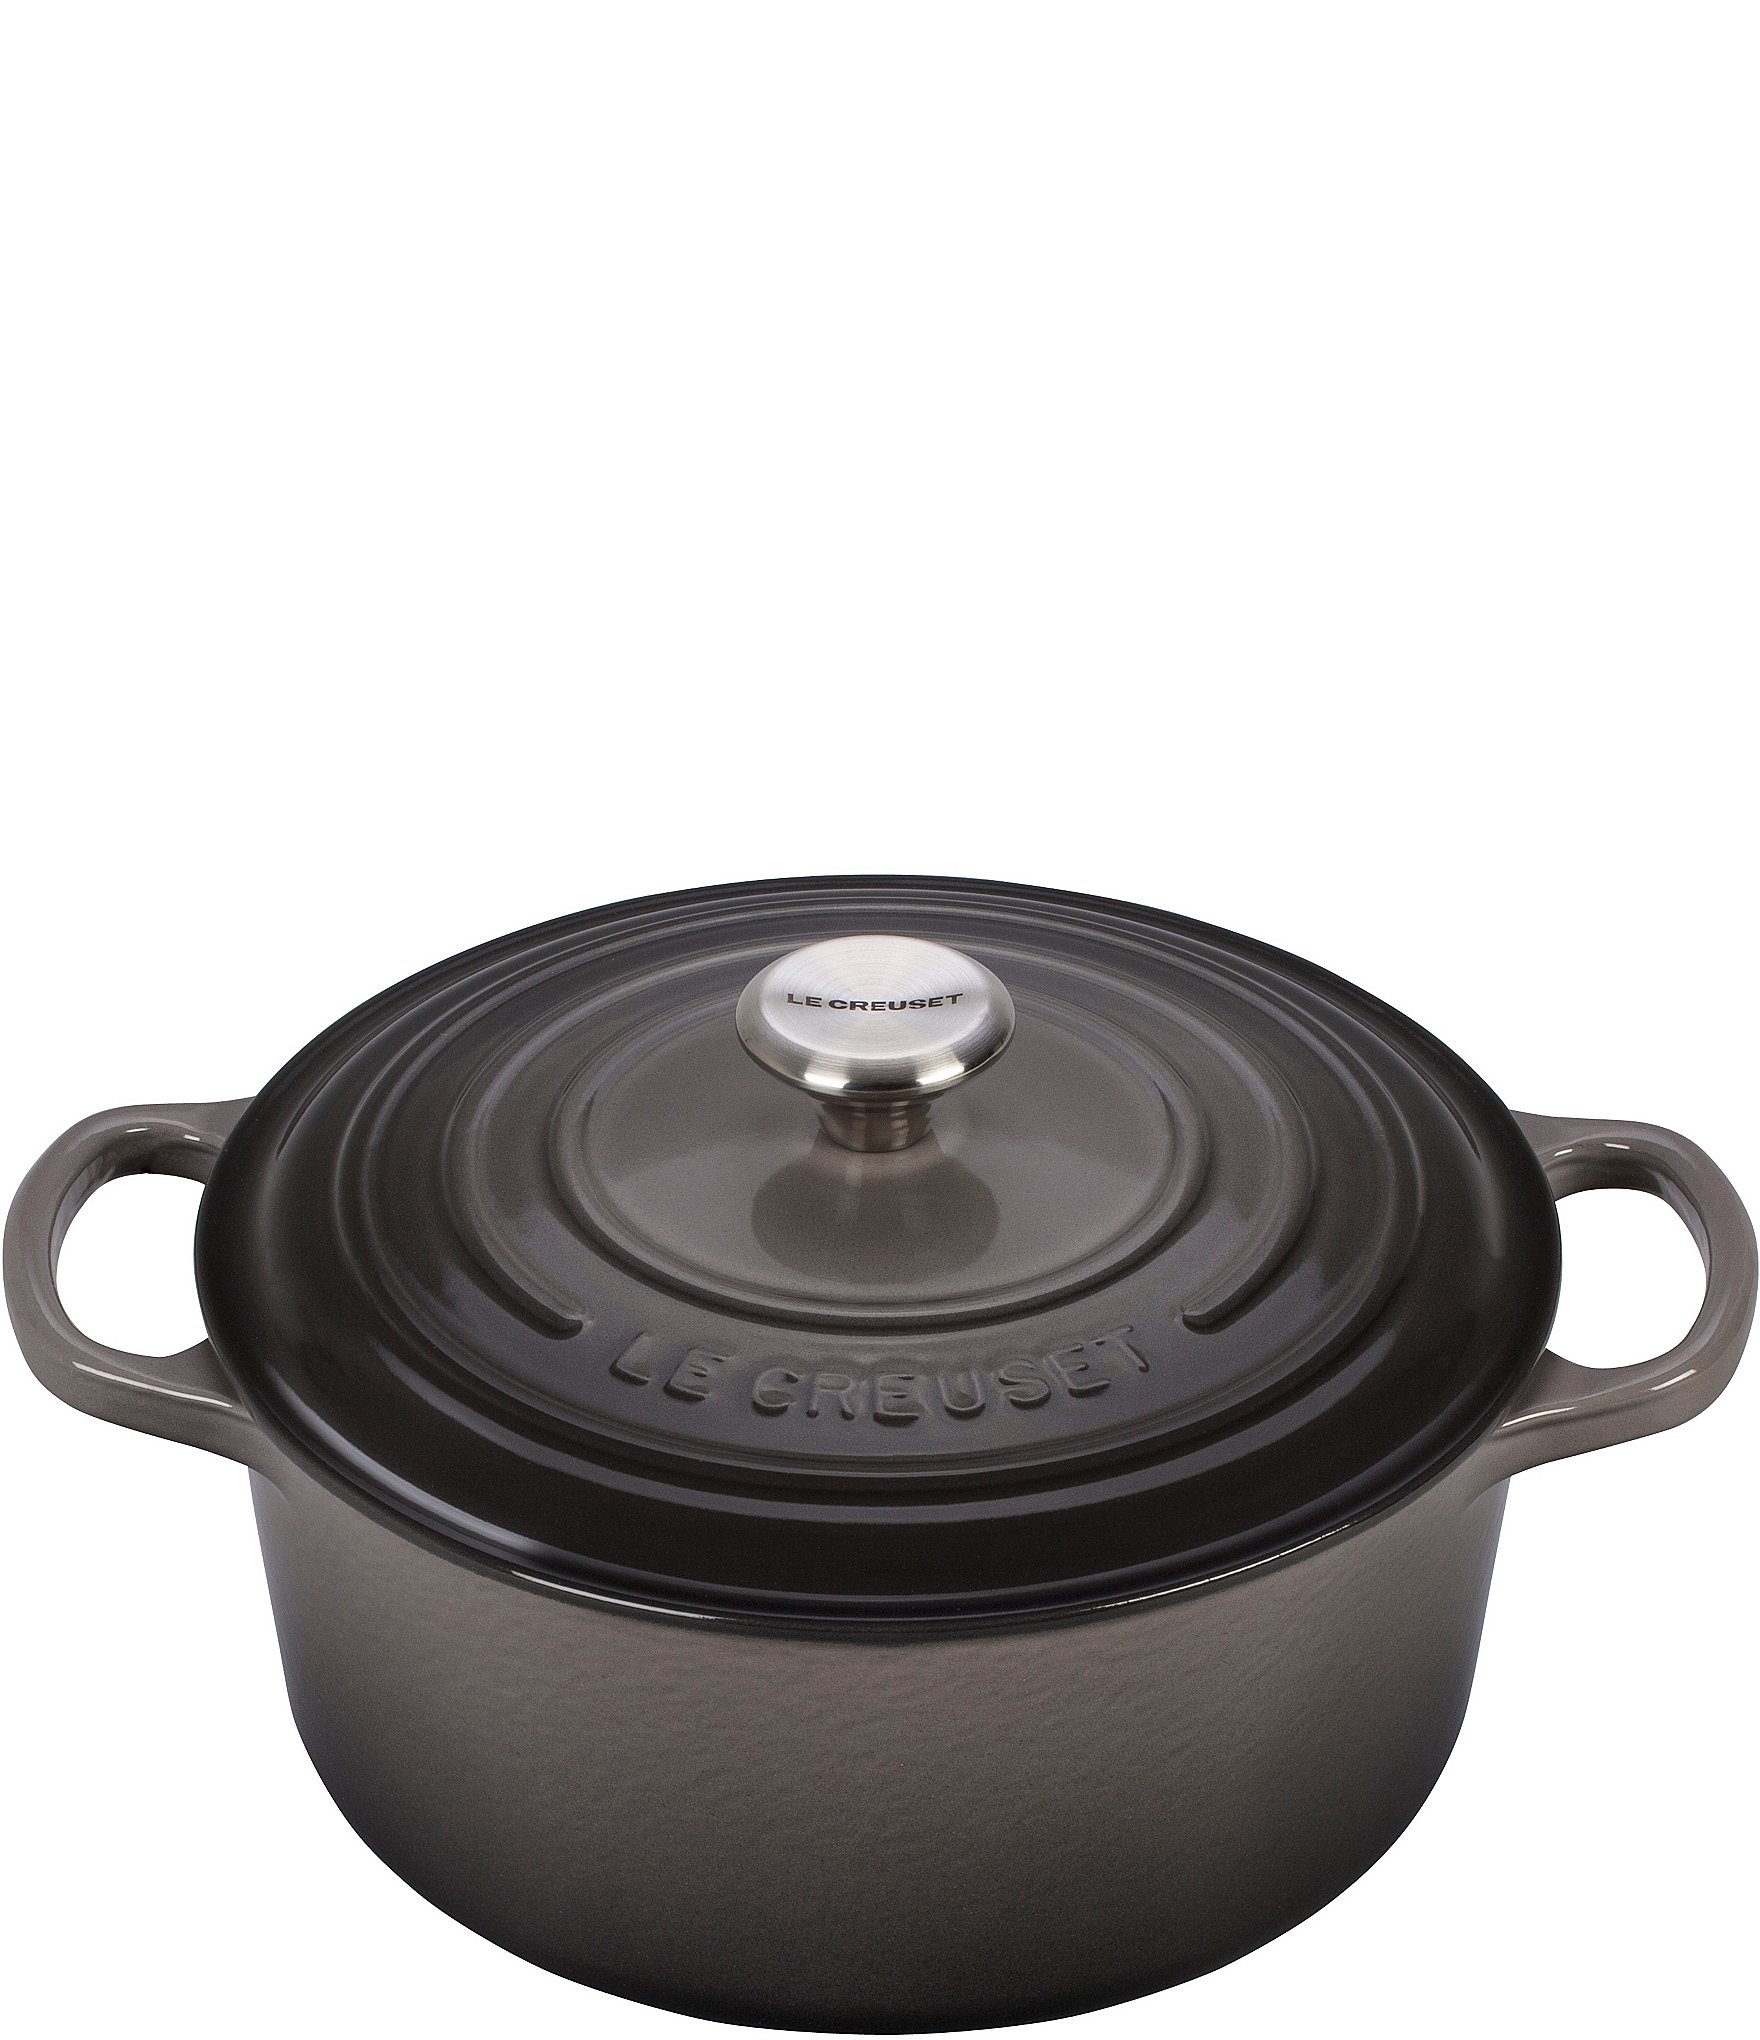 https://dimg.dillards.com/is/image/DillardsZoom/zoom/le-creuset-signature-3.5-quart-round-enameled-cast-iron-dutch-oven-with-stainless-steel/05779111_zi_oyster.jpg